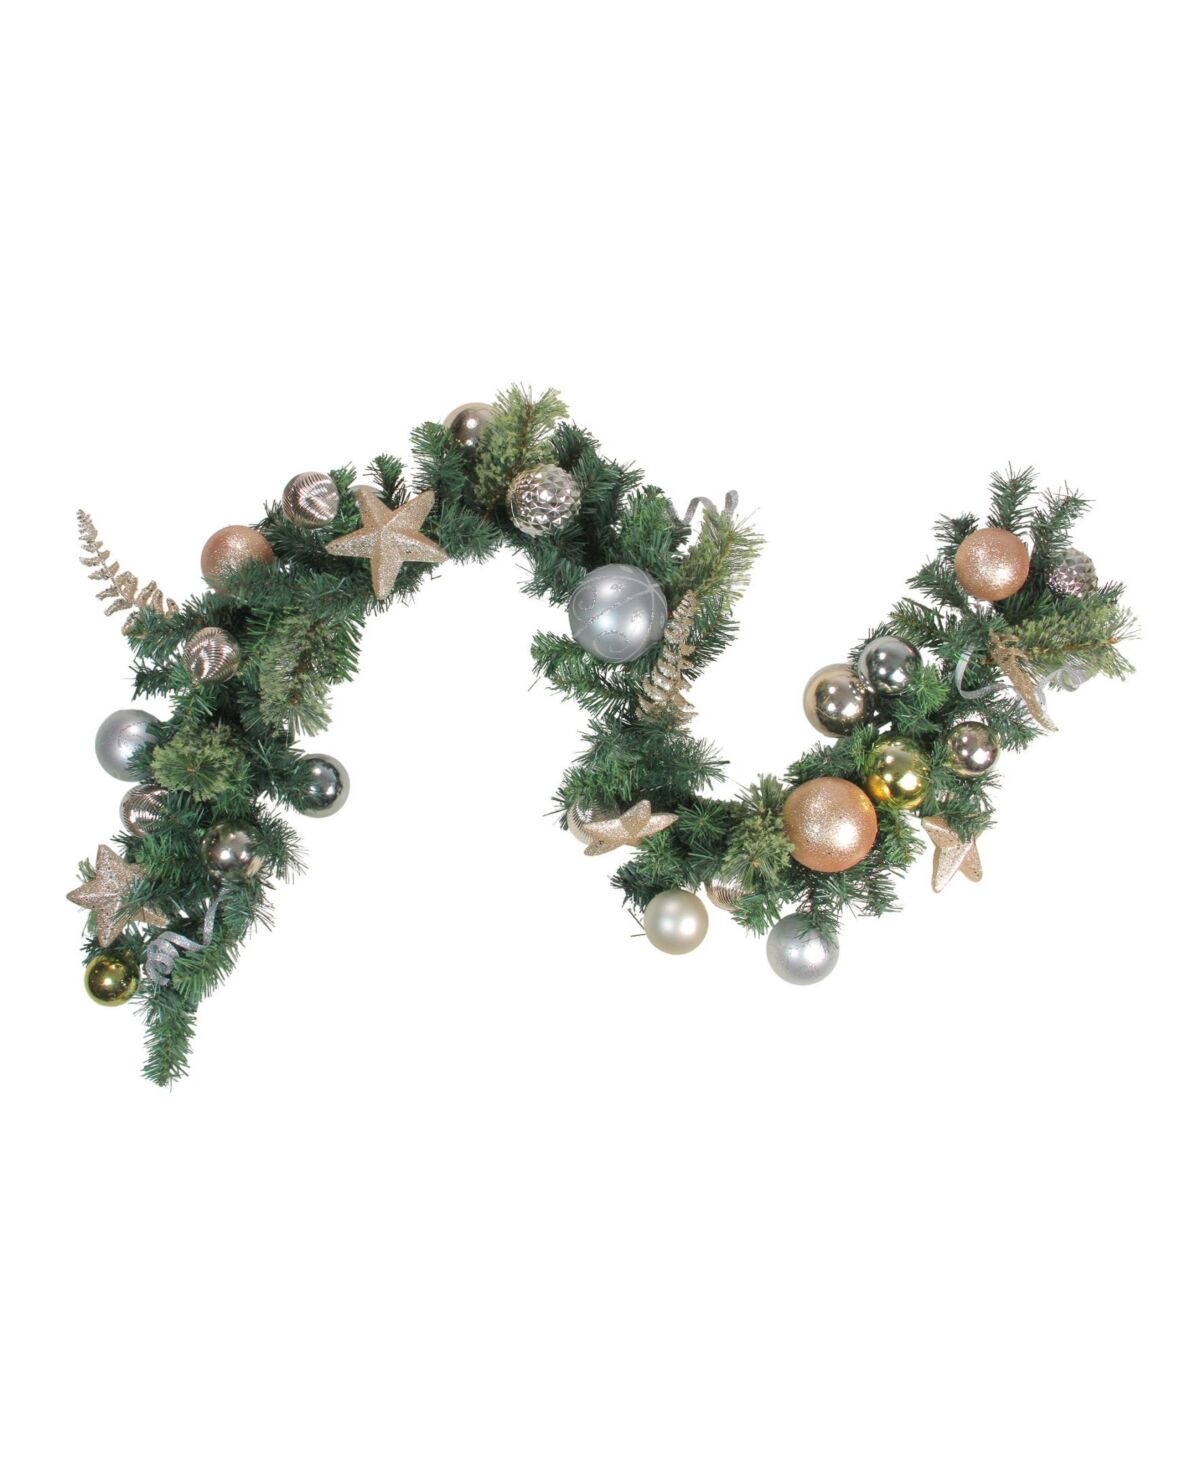 Northlight Unlit Gold Tone Leaves Ornaments with Stars Artificial Christmas Garland - Gold